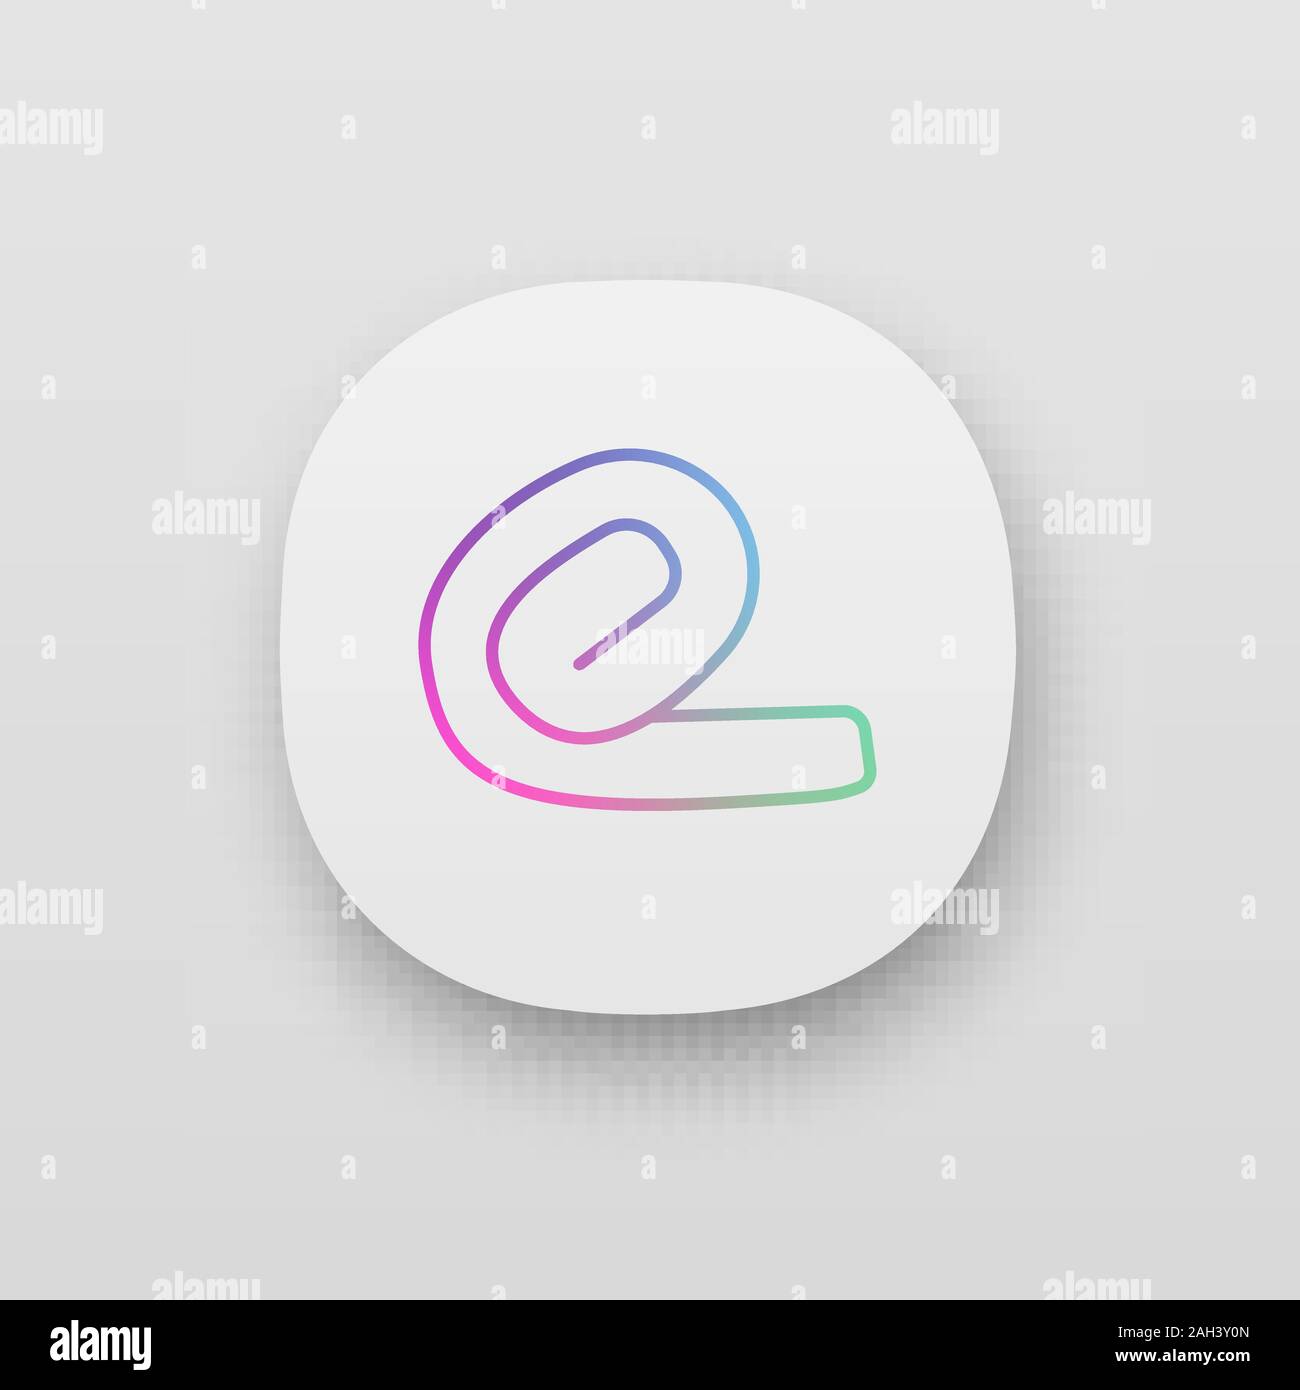 Roll up mattress app icon. Rolled latex or memory foam topper. Portable springless mattress for camping. UI/UX user interface. Web or mobile applicati Stock Vector